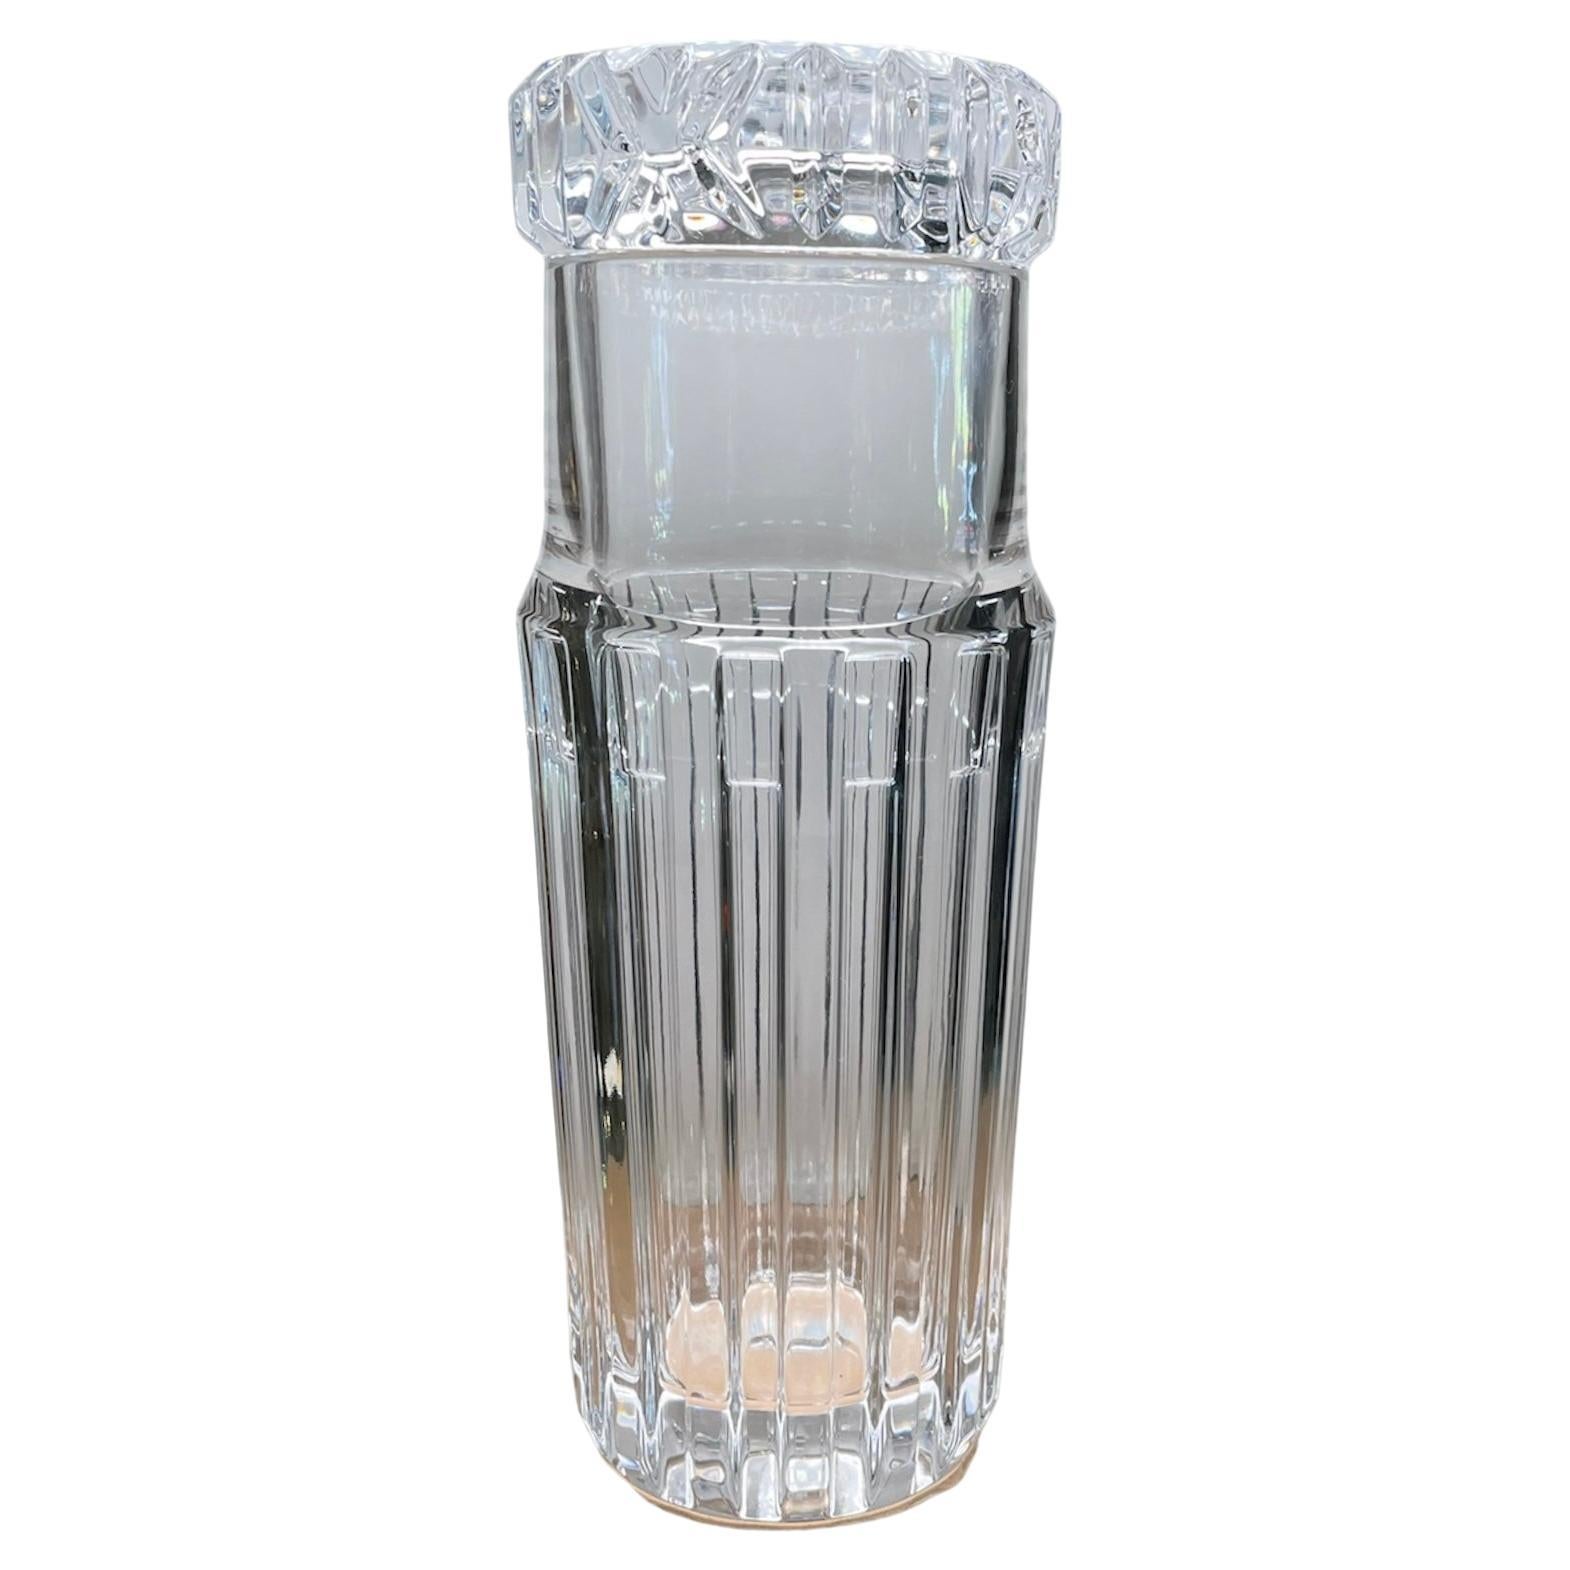 Tiffany & Co Crystal “Atlas” Set of Water Carafe and Glass